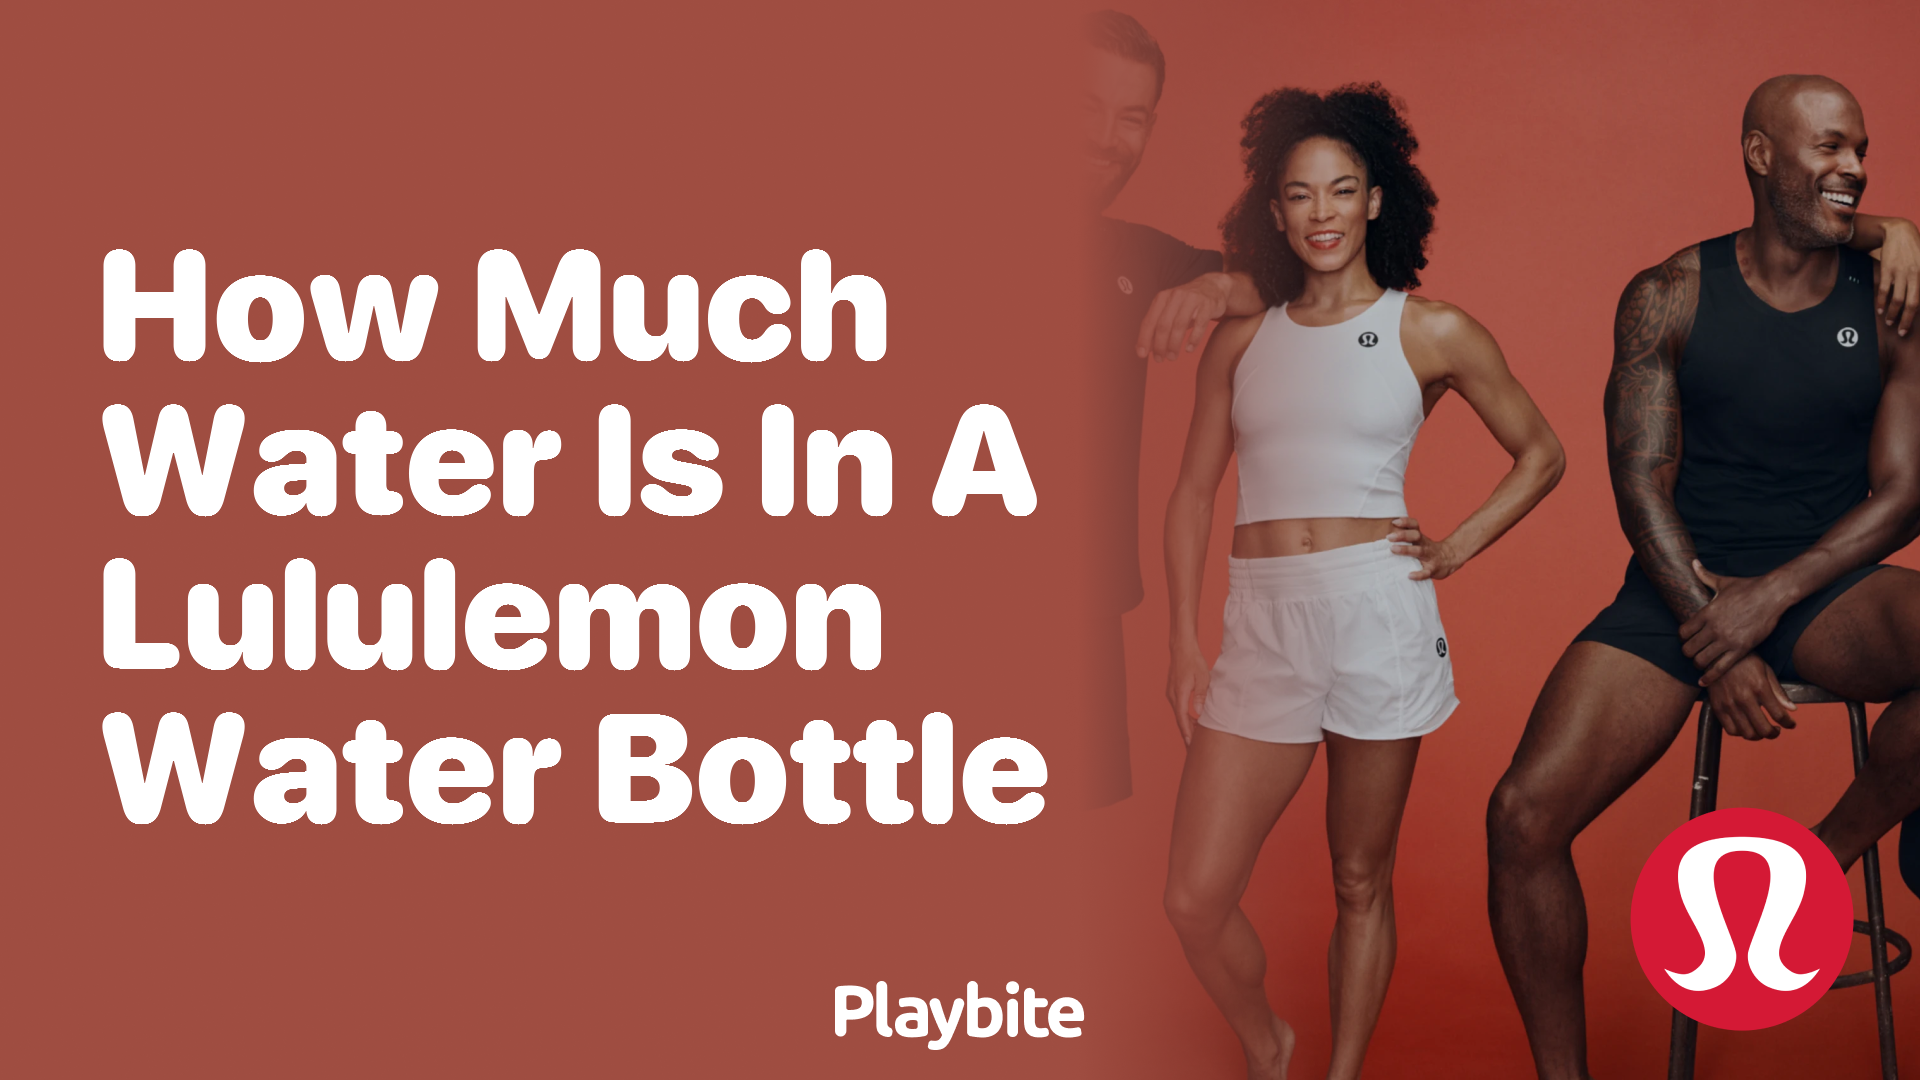 How Much Water Fits in a Lululemon Water Bottle? - Playbite